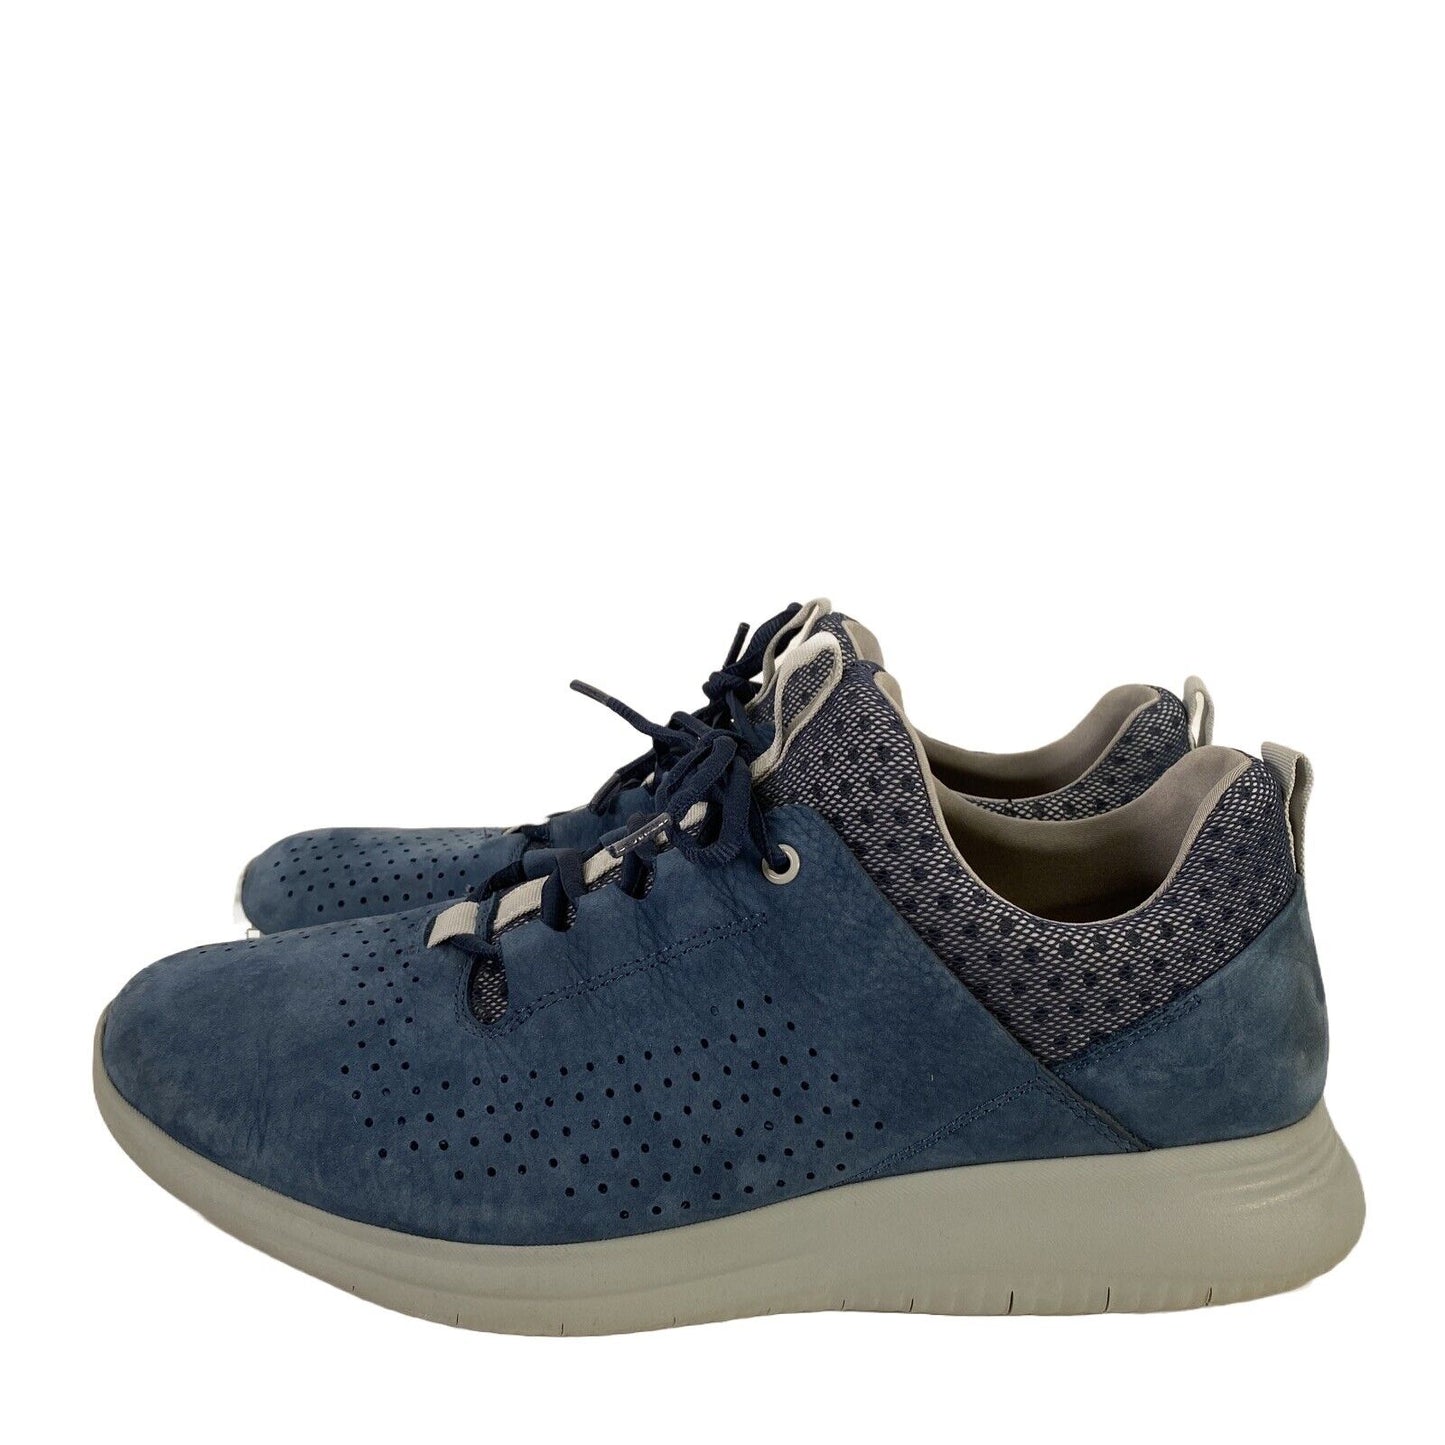 Johnston and Murphy Men's Blue Suede Lace Up Sneakers - 10M